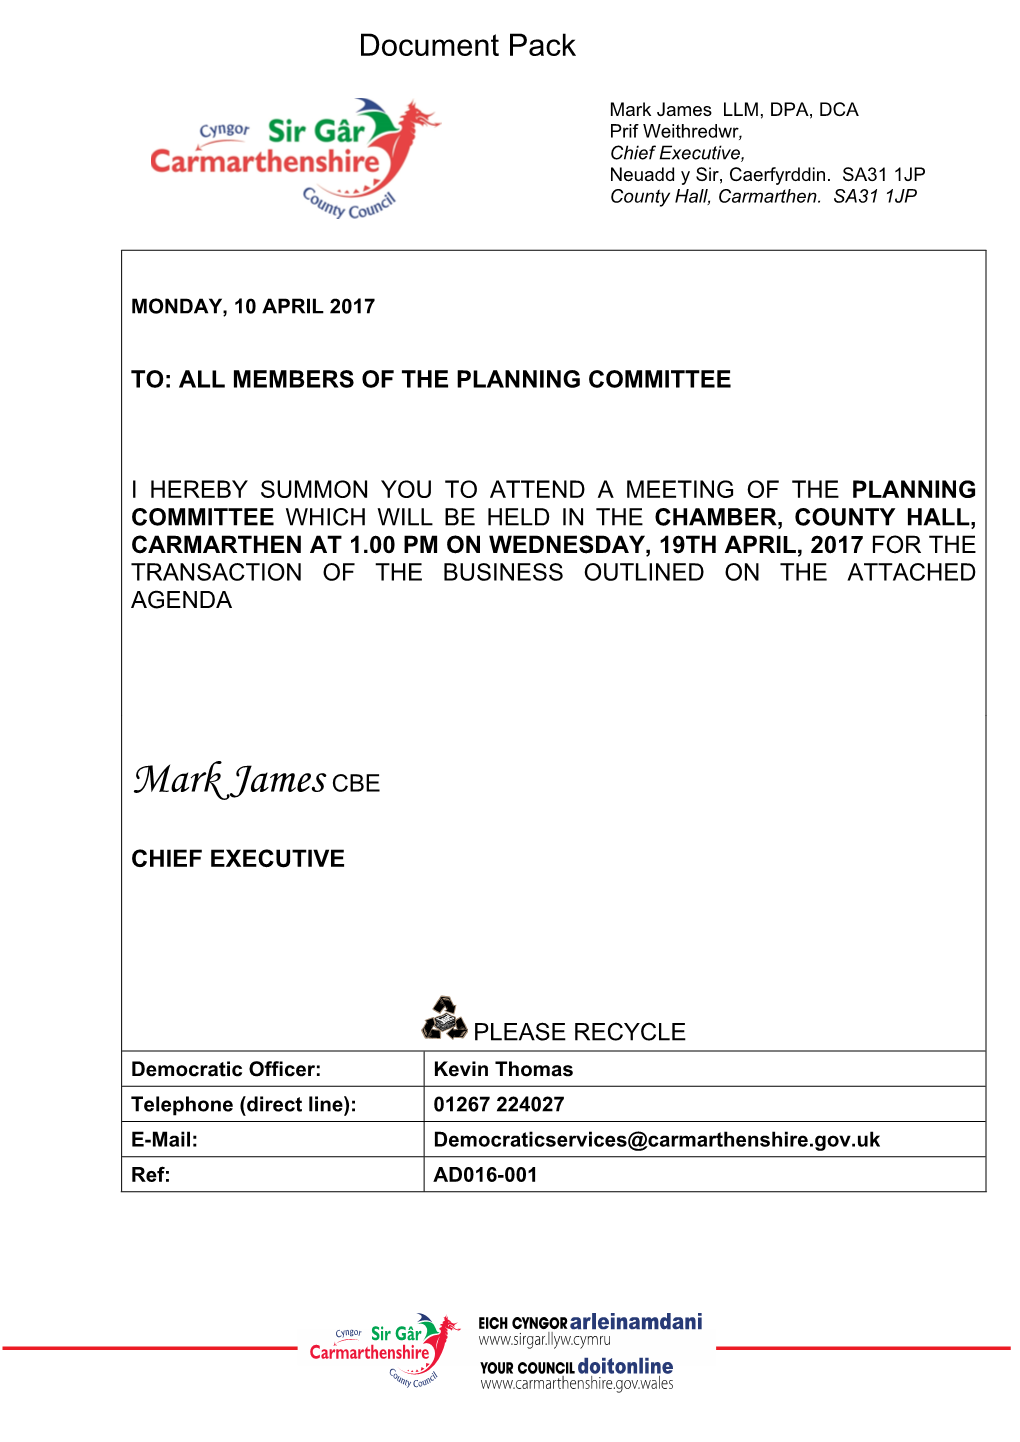 (Public Pack)Agenda Document for Planning Committee, 19/04/2017